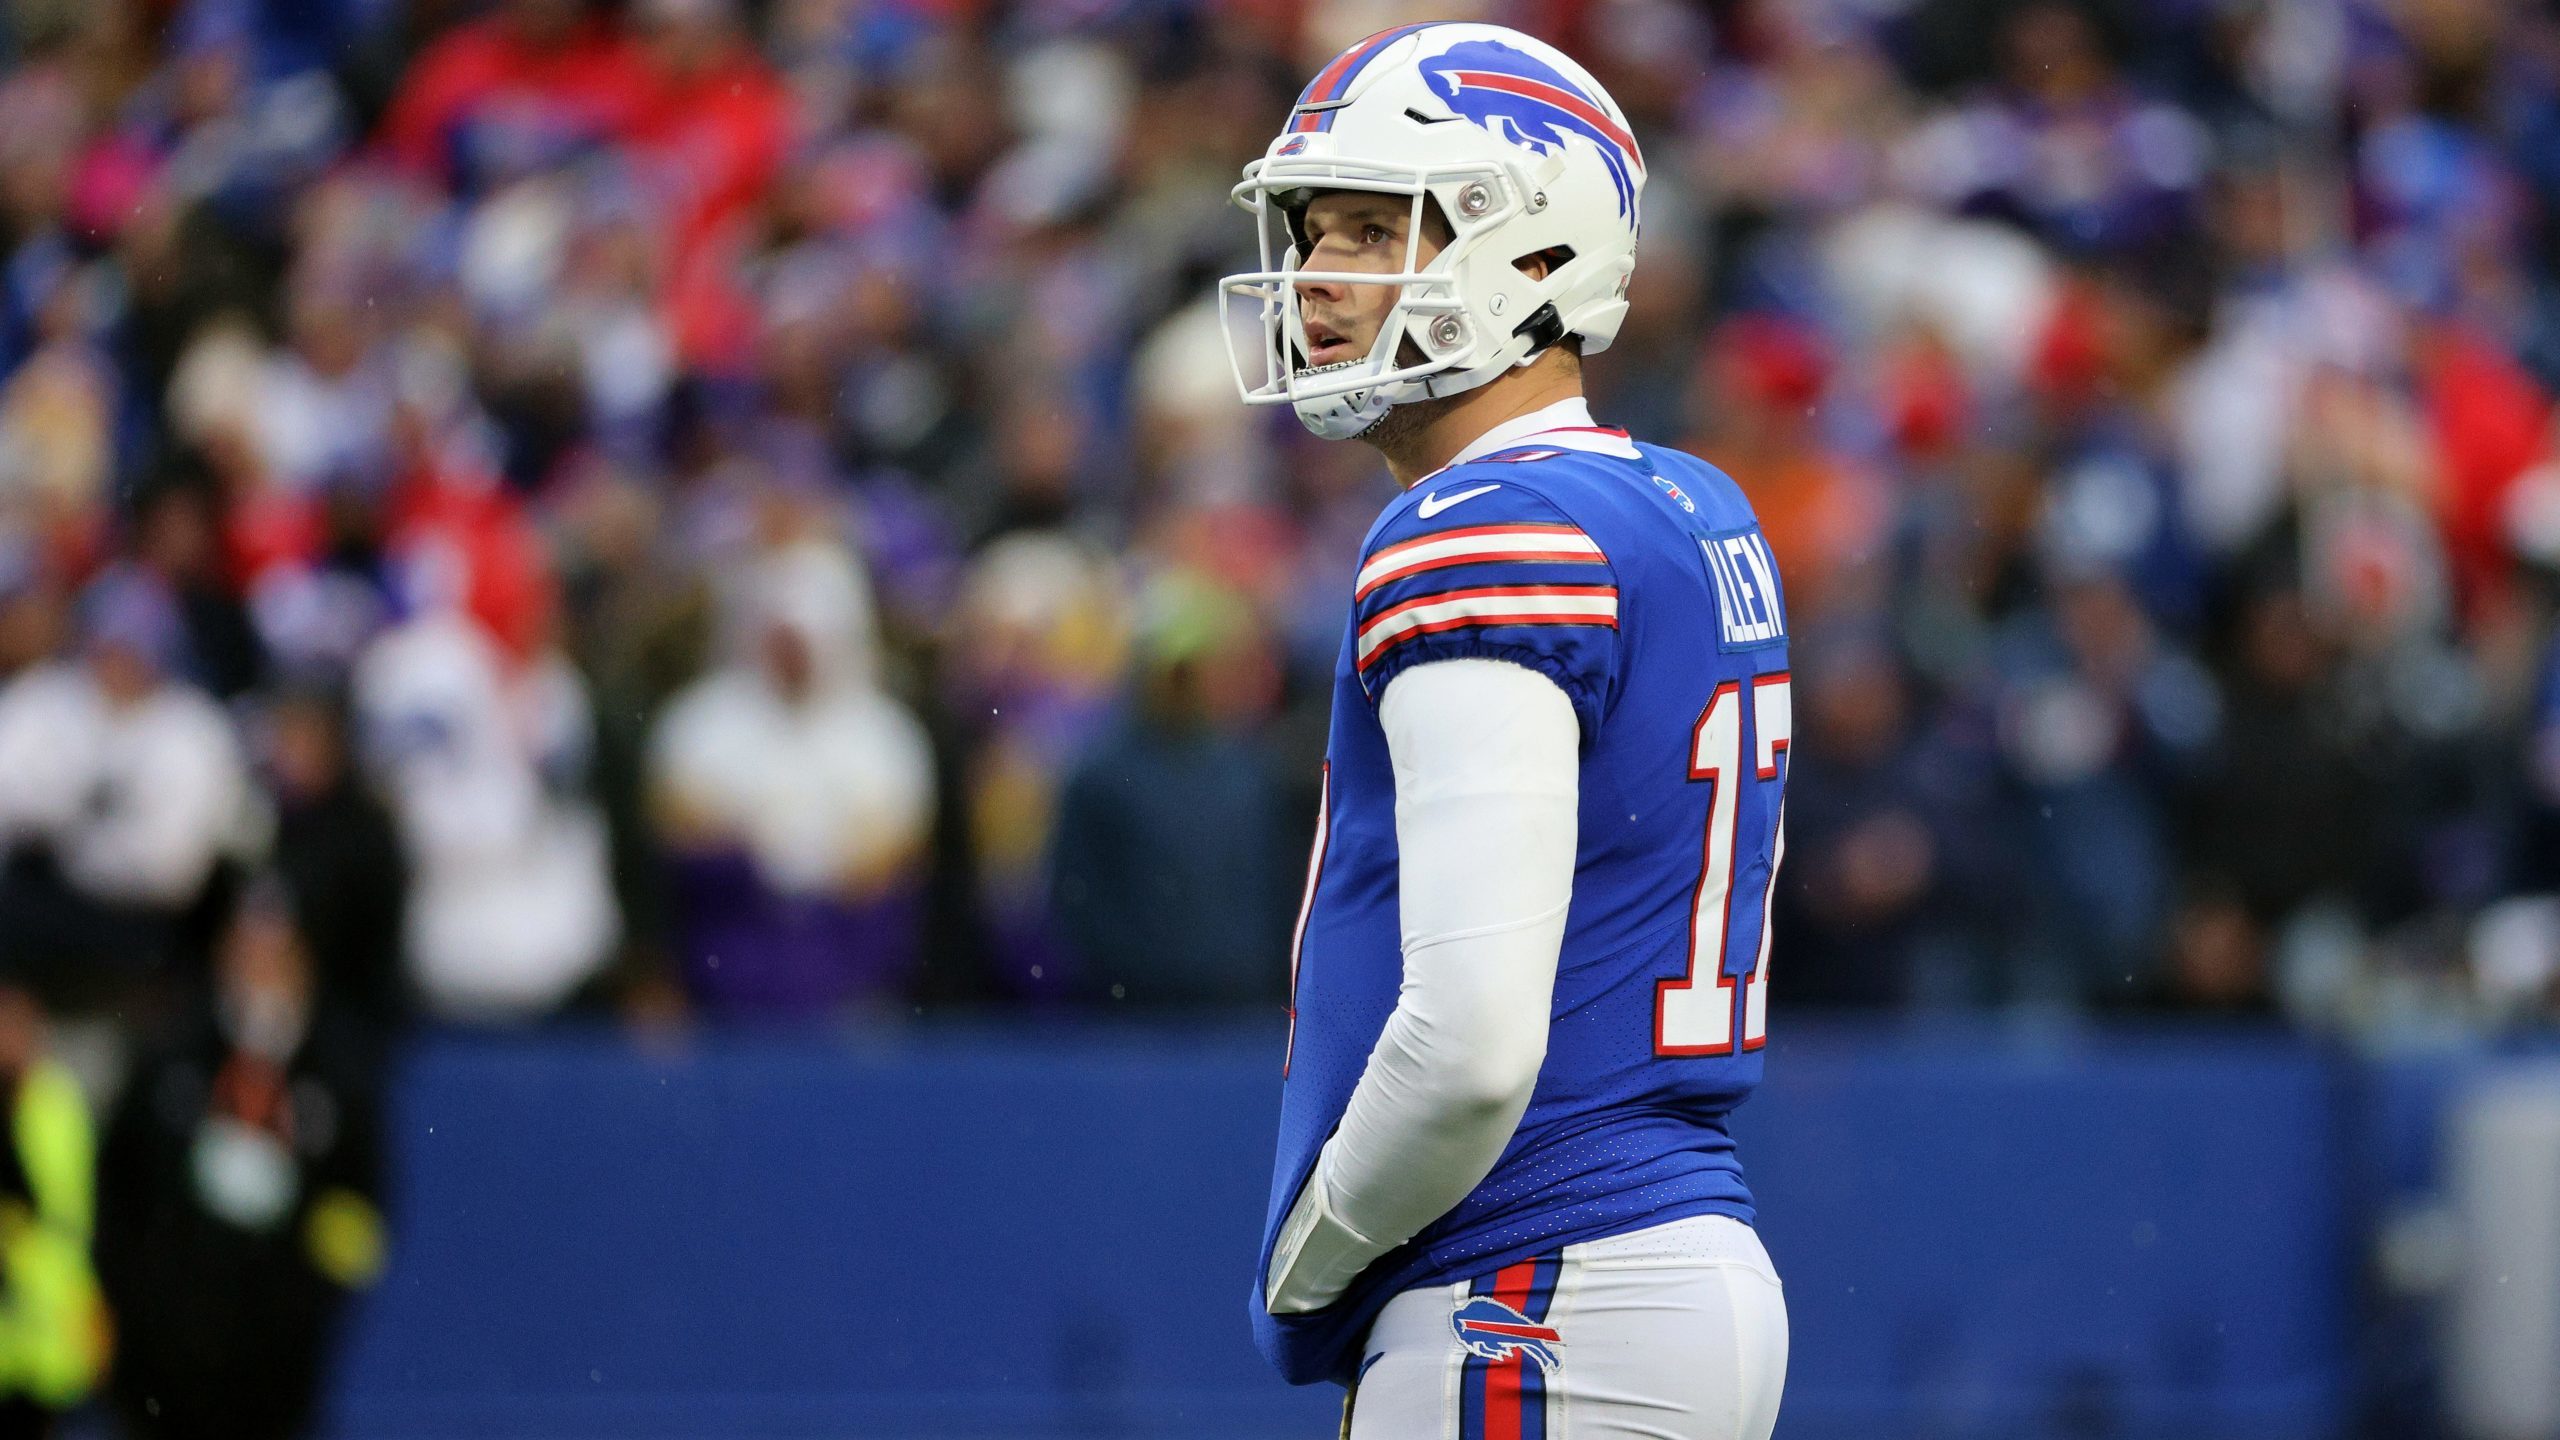 Bills Fall Behind In Playoff Race But Remain a Problem for AFC